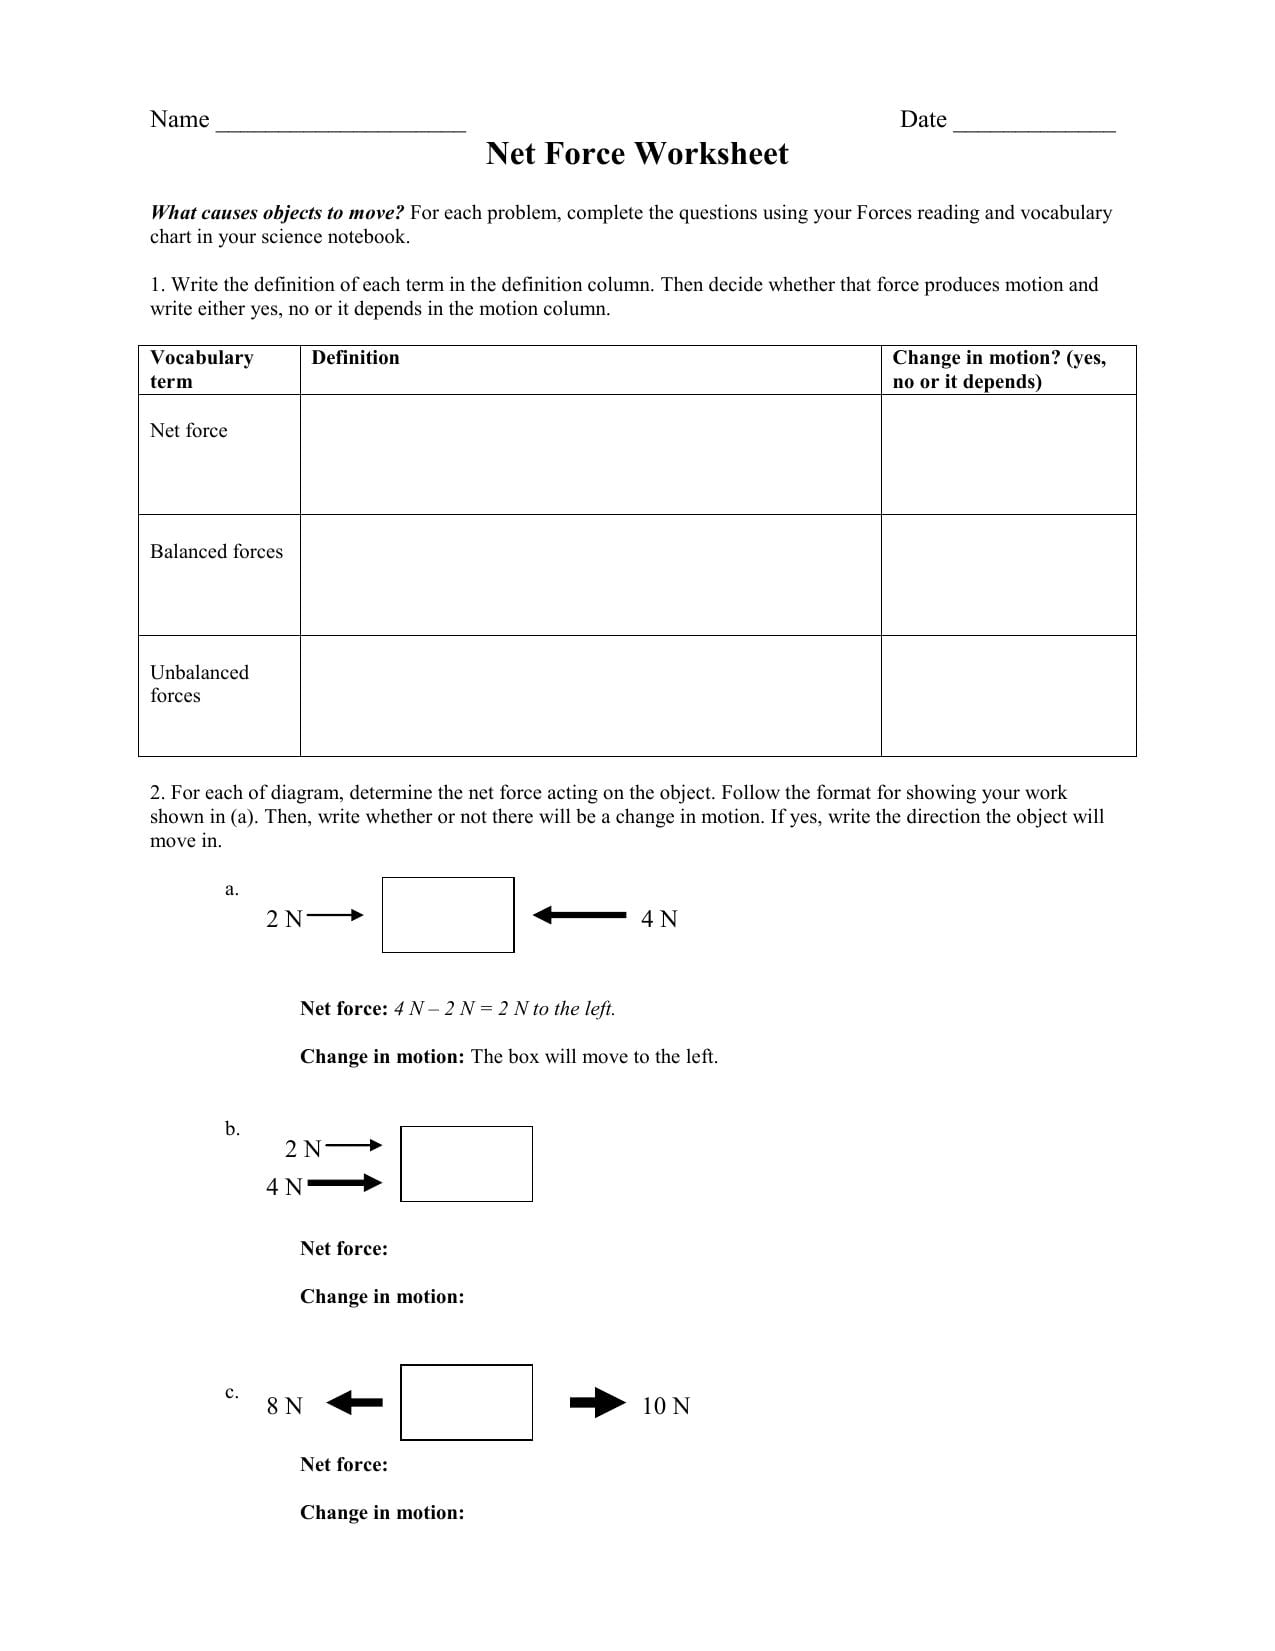 Net Force Worksheet  Crjh 8Th Grade Science Along With Net Force Worksheet Answer Key